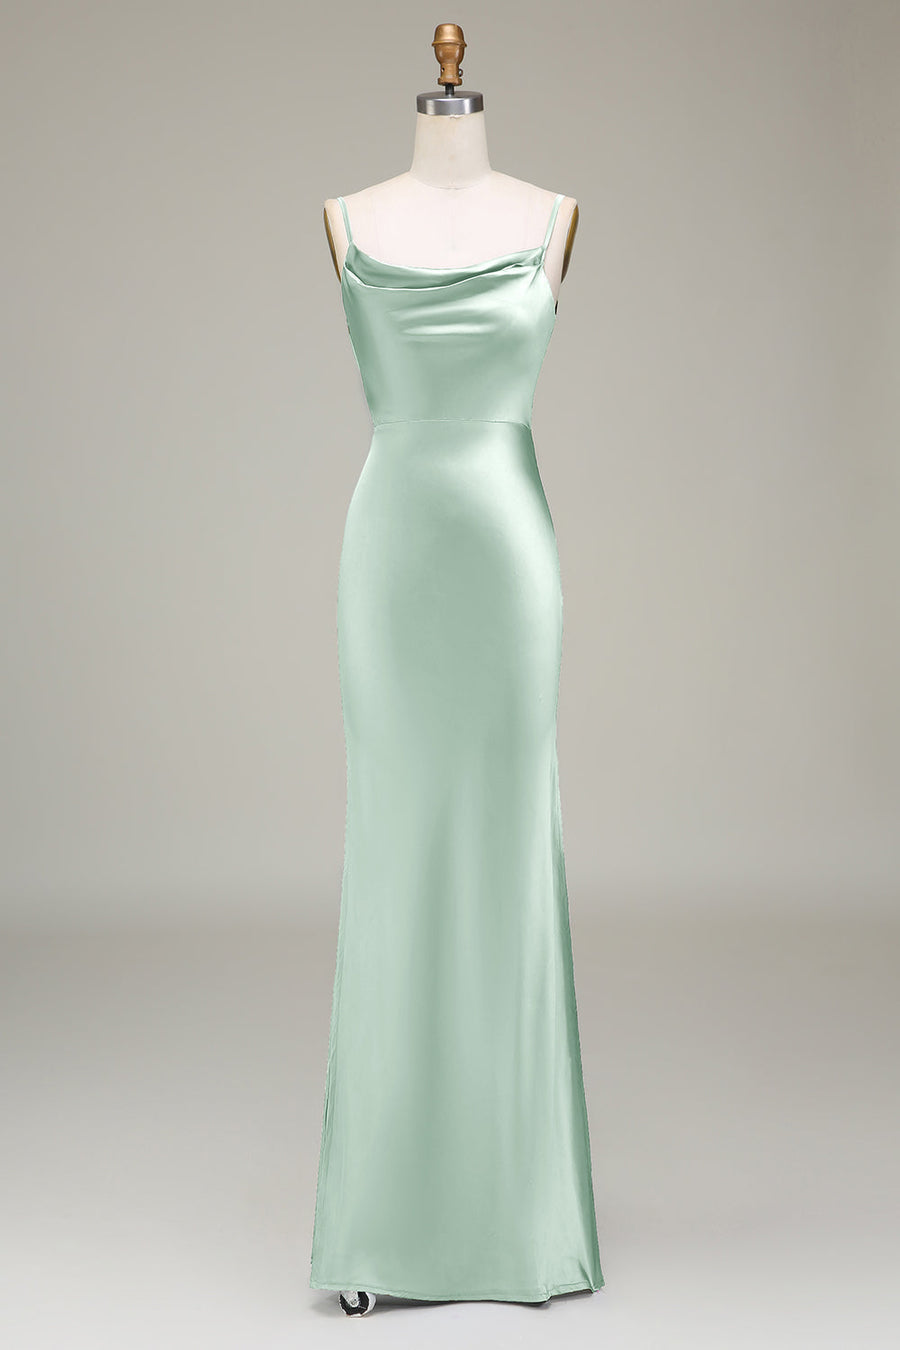 Cowl Neck and Back Maxi Dress in mint green